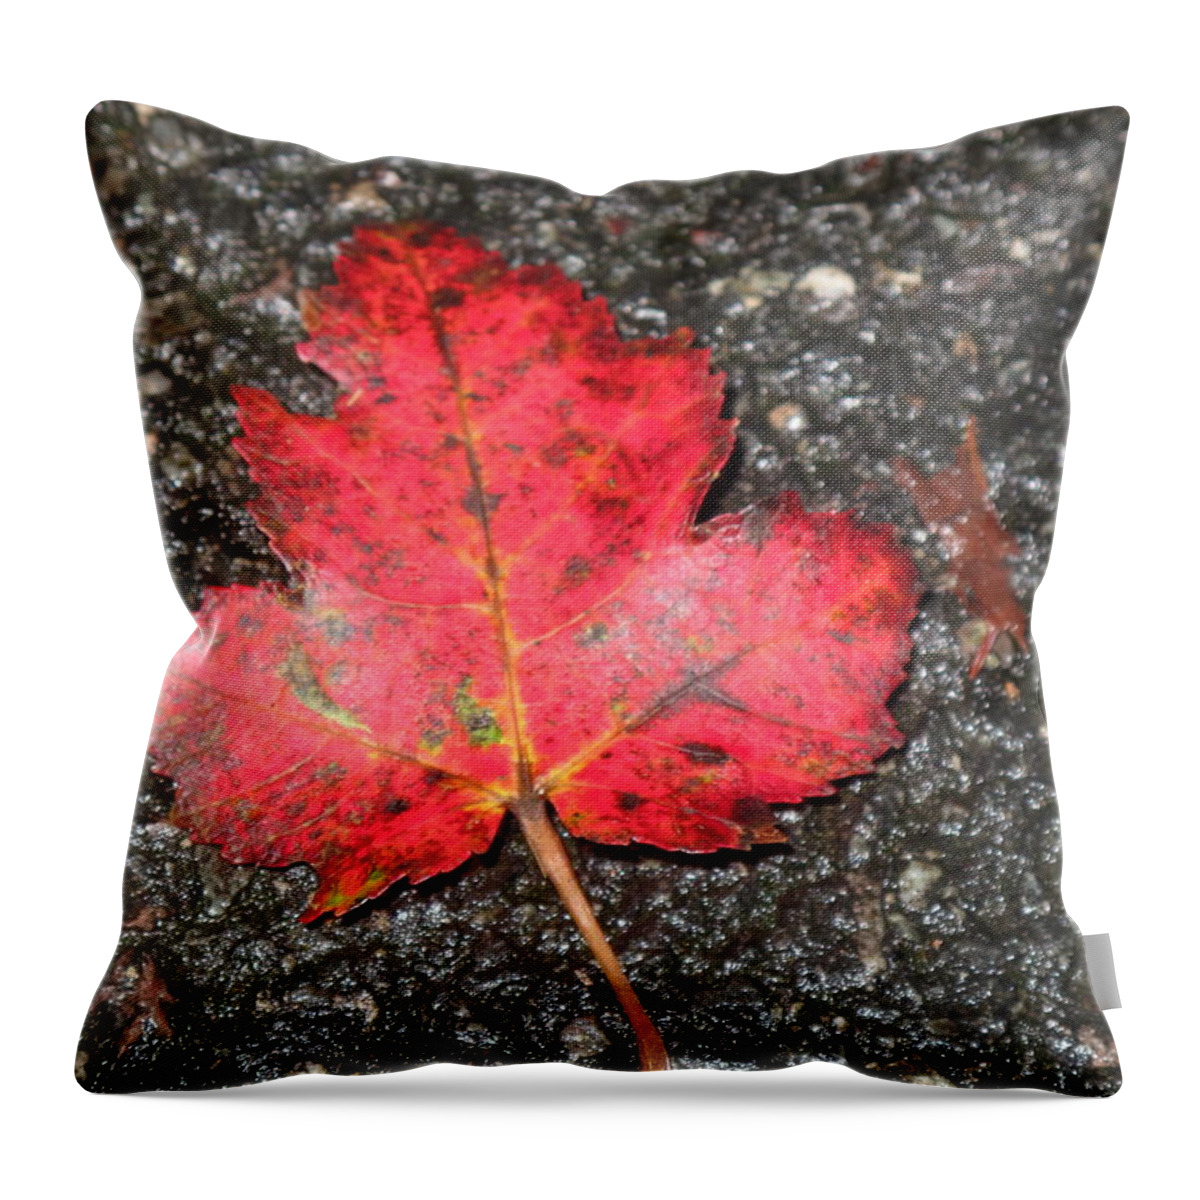 Leaves Throw Pillow featuring the photograph Red Leaf on Pavement by Barbara McDevitt